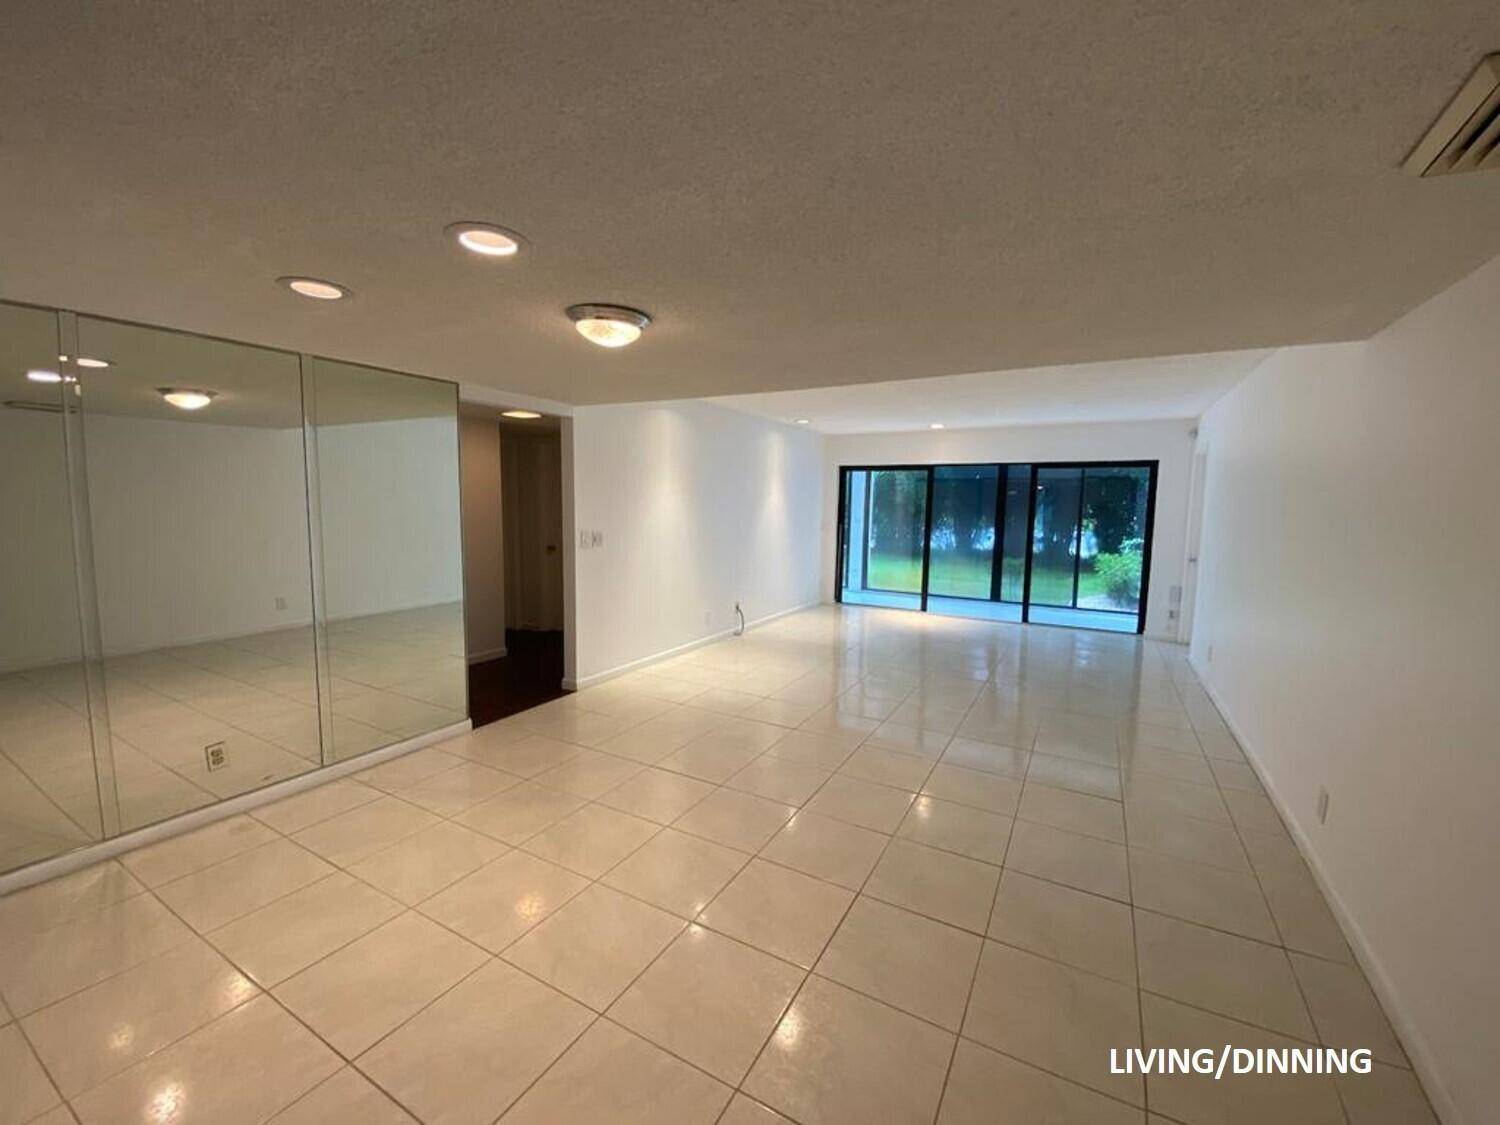 This corner unit is located on the first floor of a two story building and has been beautifully remodeled.